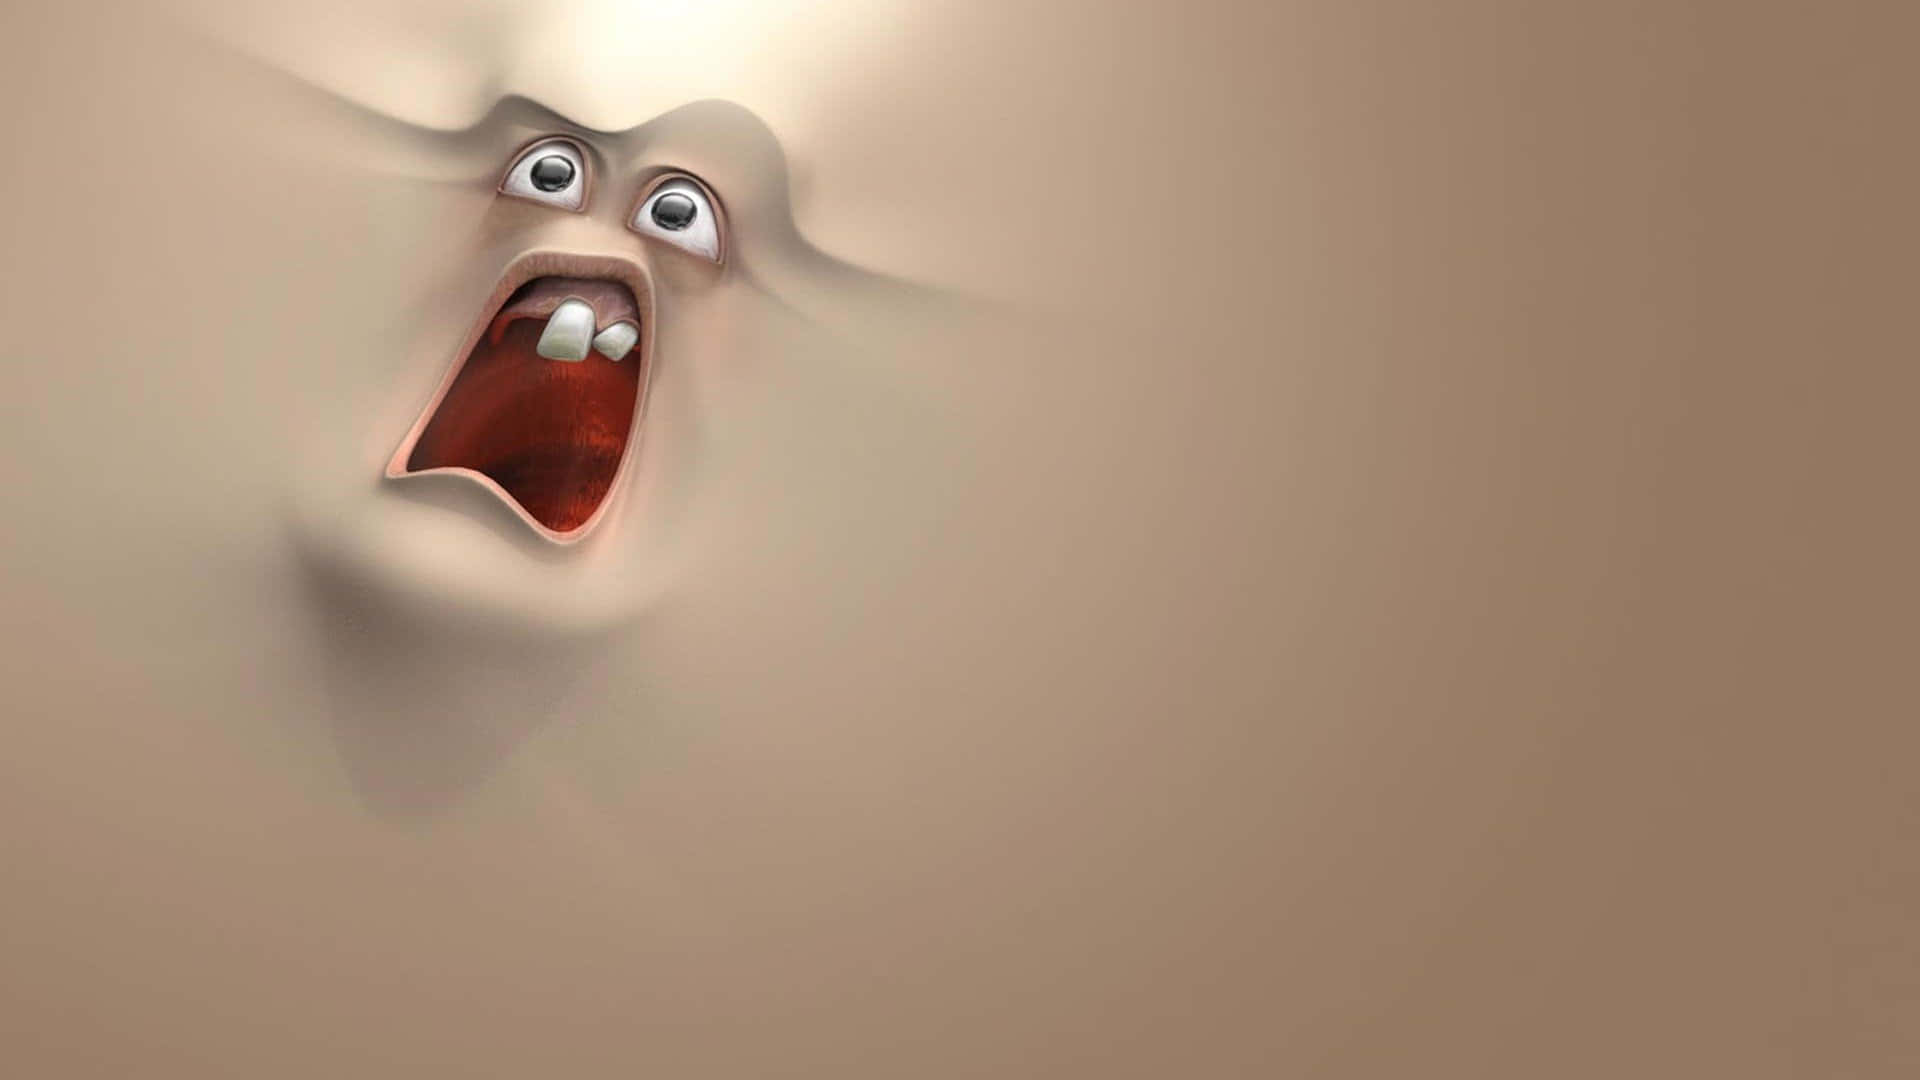 Weird Screaming Face In Beige Picture